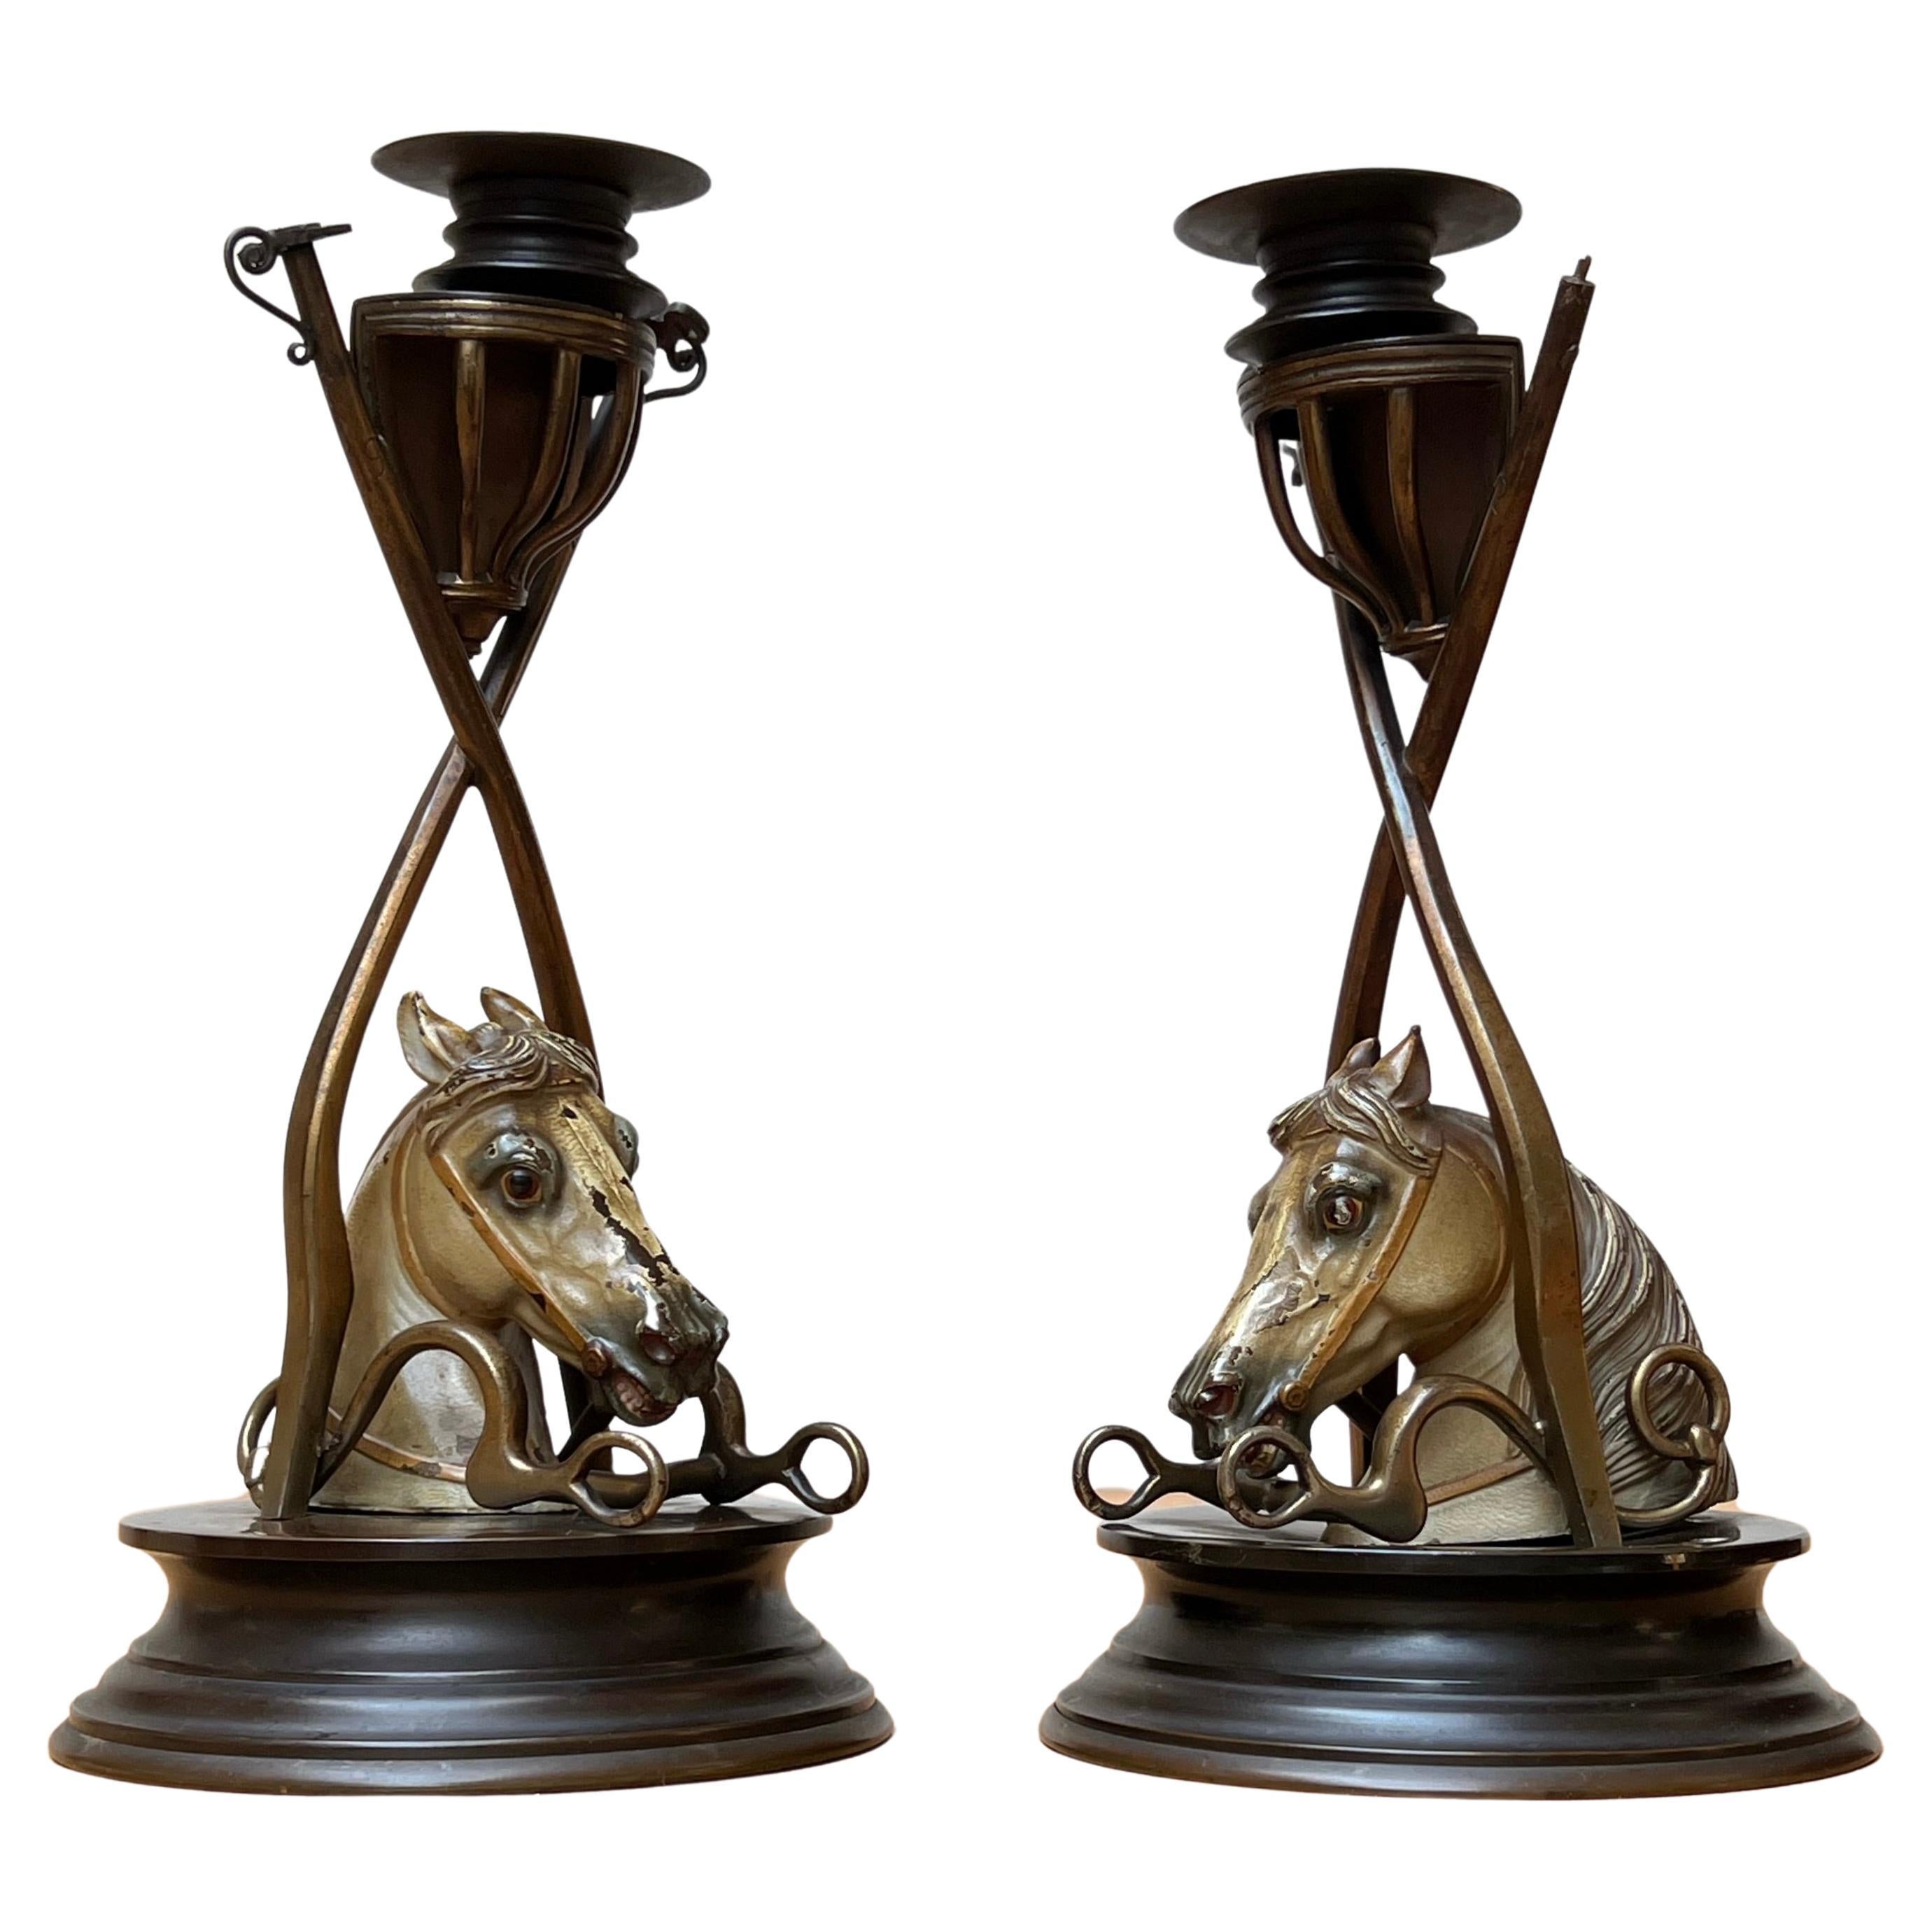 Practical size, antique bronze and brass candleholders for horse lovers.

If you are looking for one of a kind antiques to create the perfect atmosphere at home or in your office then this very attractive and highly decorative pair of horse theme